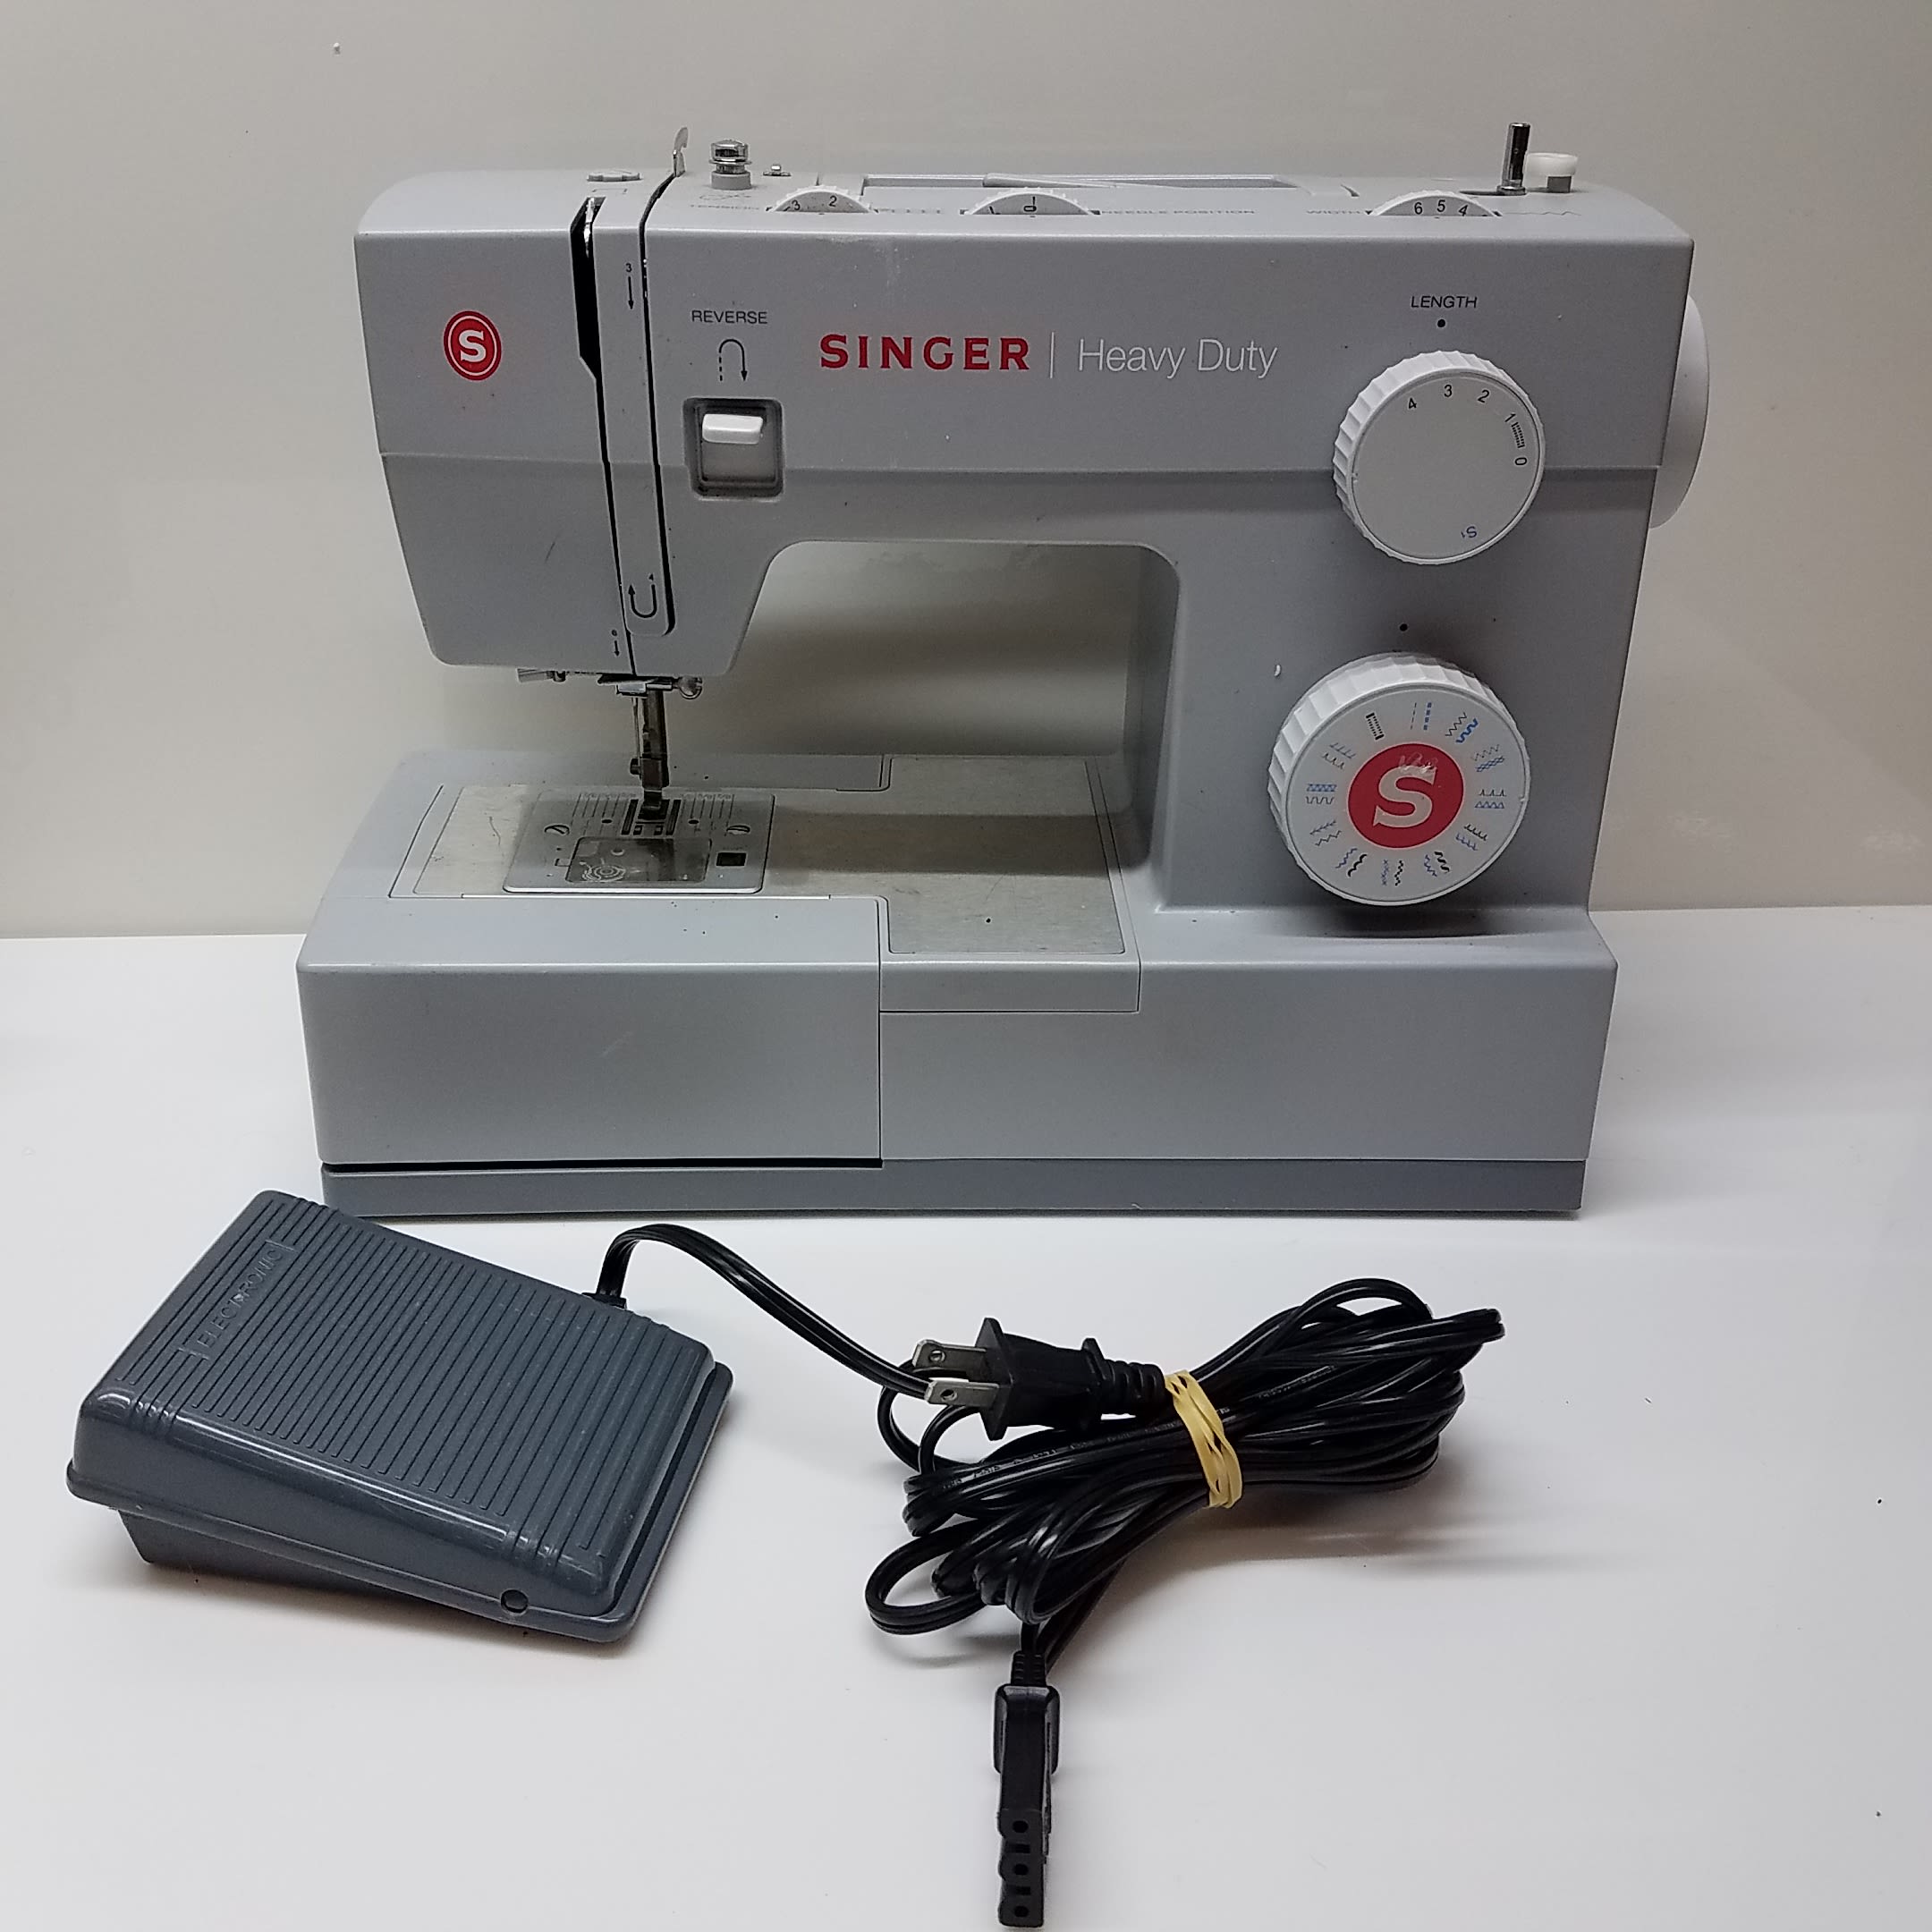 unboxing my new sewing machine 🥲💖 Singer Heavy Duty 4452 that